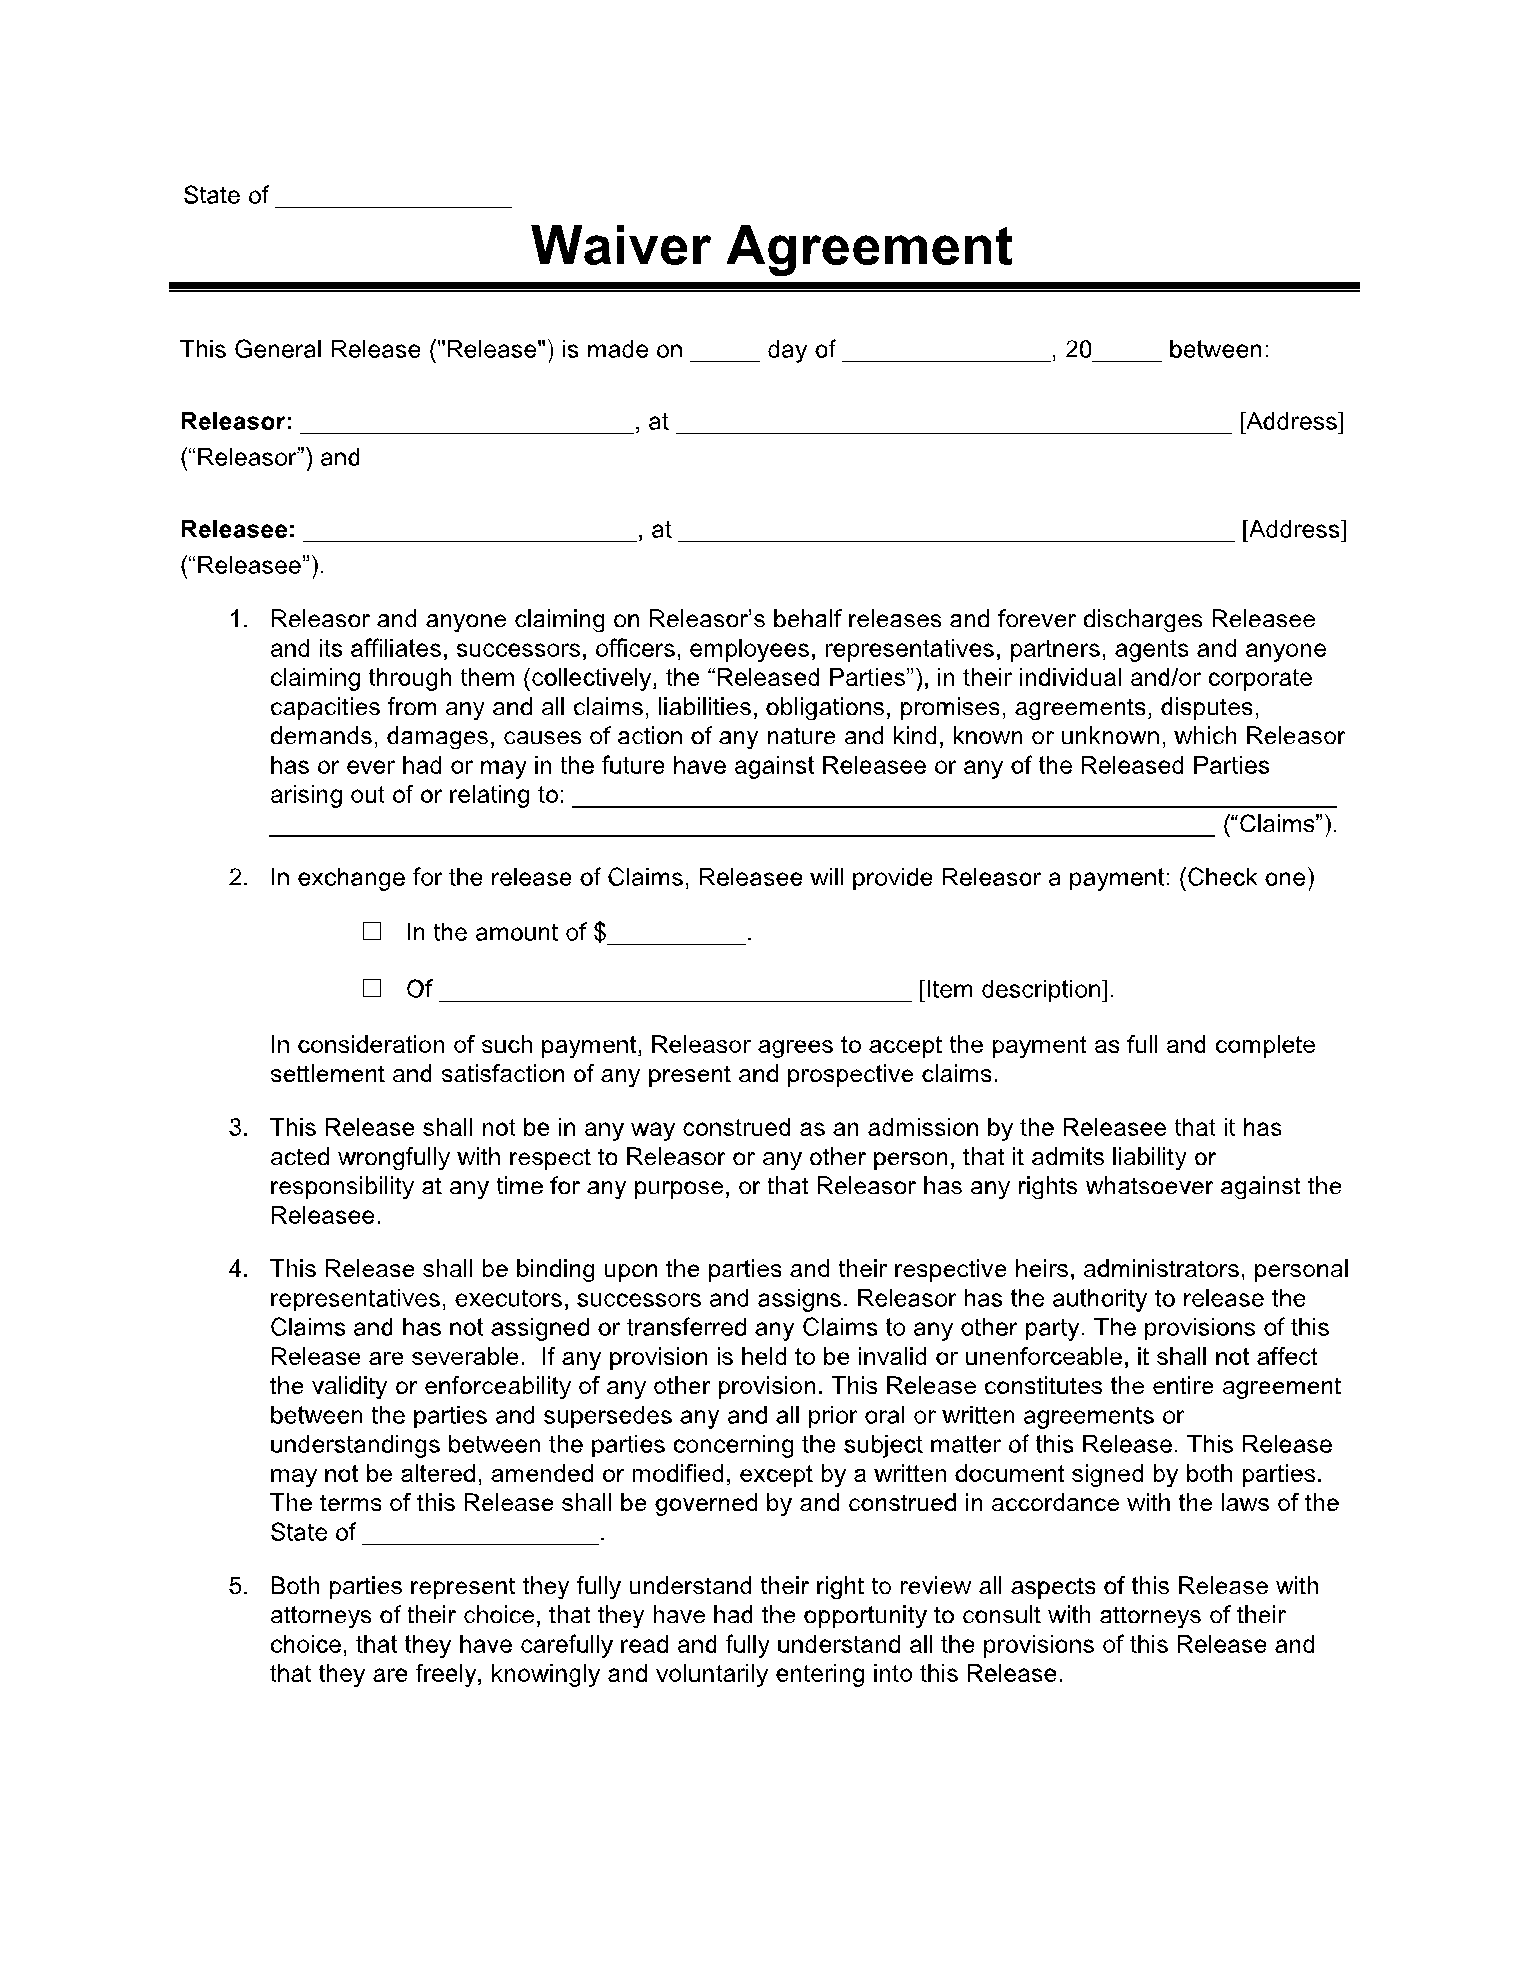 Waiver Agreement